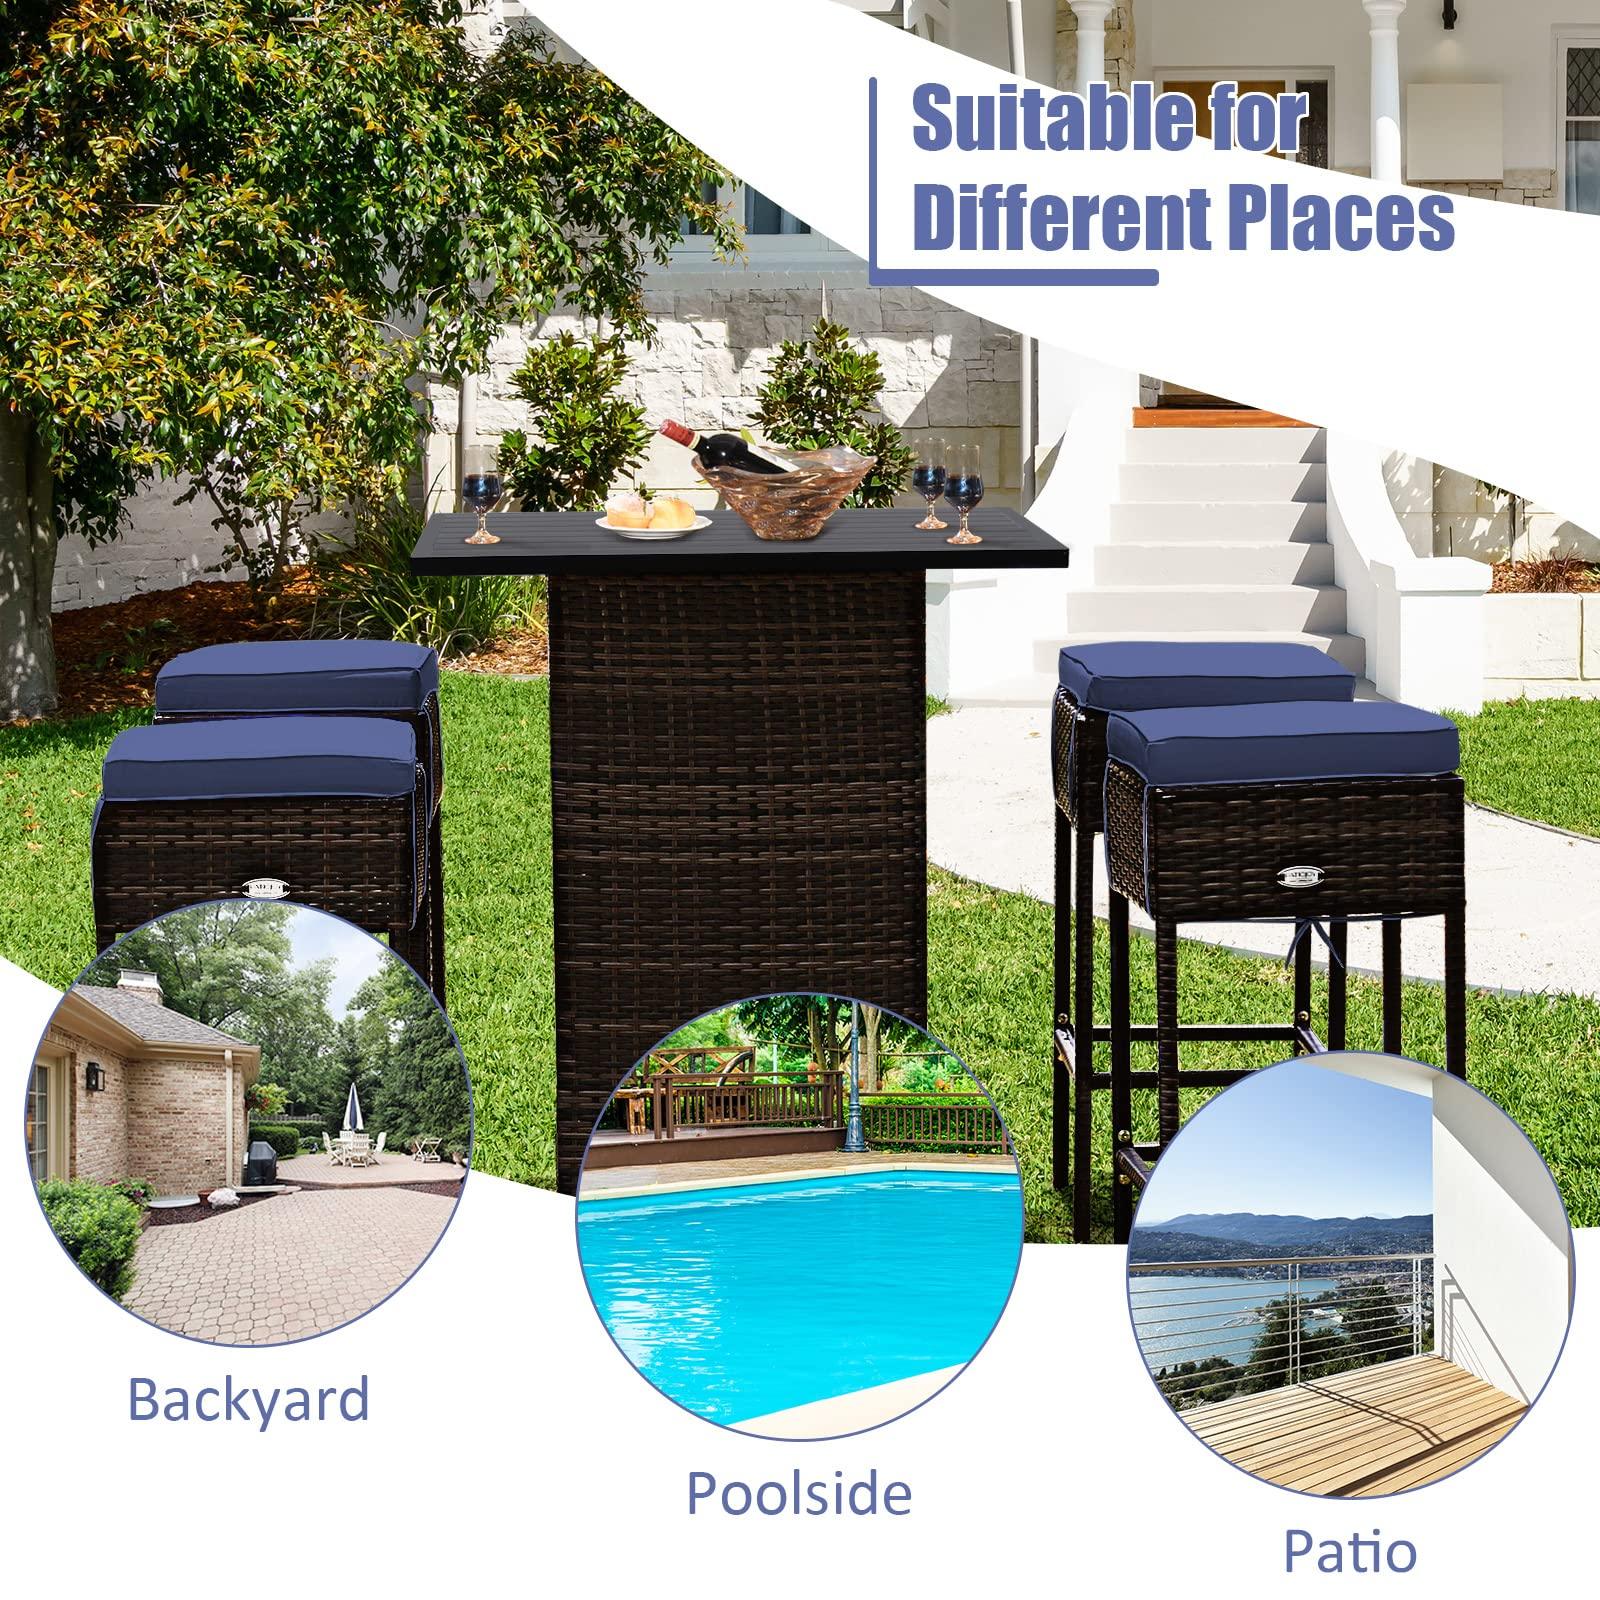 Tangkula 5 Piece Outdoor Rattan Bar Set, Patio Bar Furniture with 4 Cushions Stools and Smooth Top Table with Hidden Storage Shelf, Outdoor Conversation Set for Poolside, Backyard, Lawn (Navy Blue) - CookCave